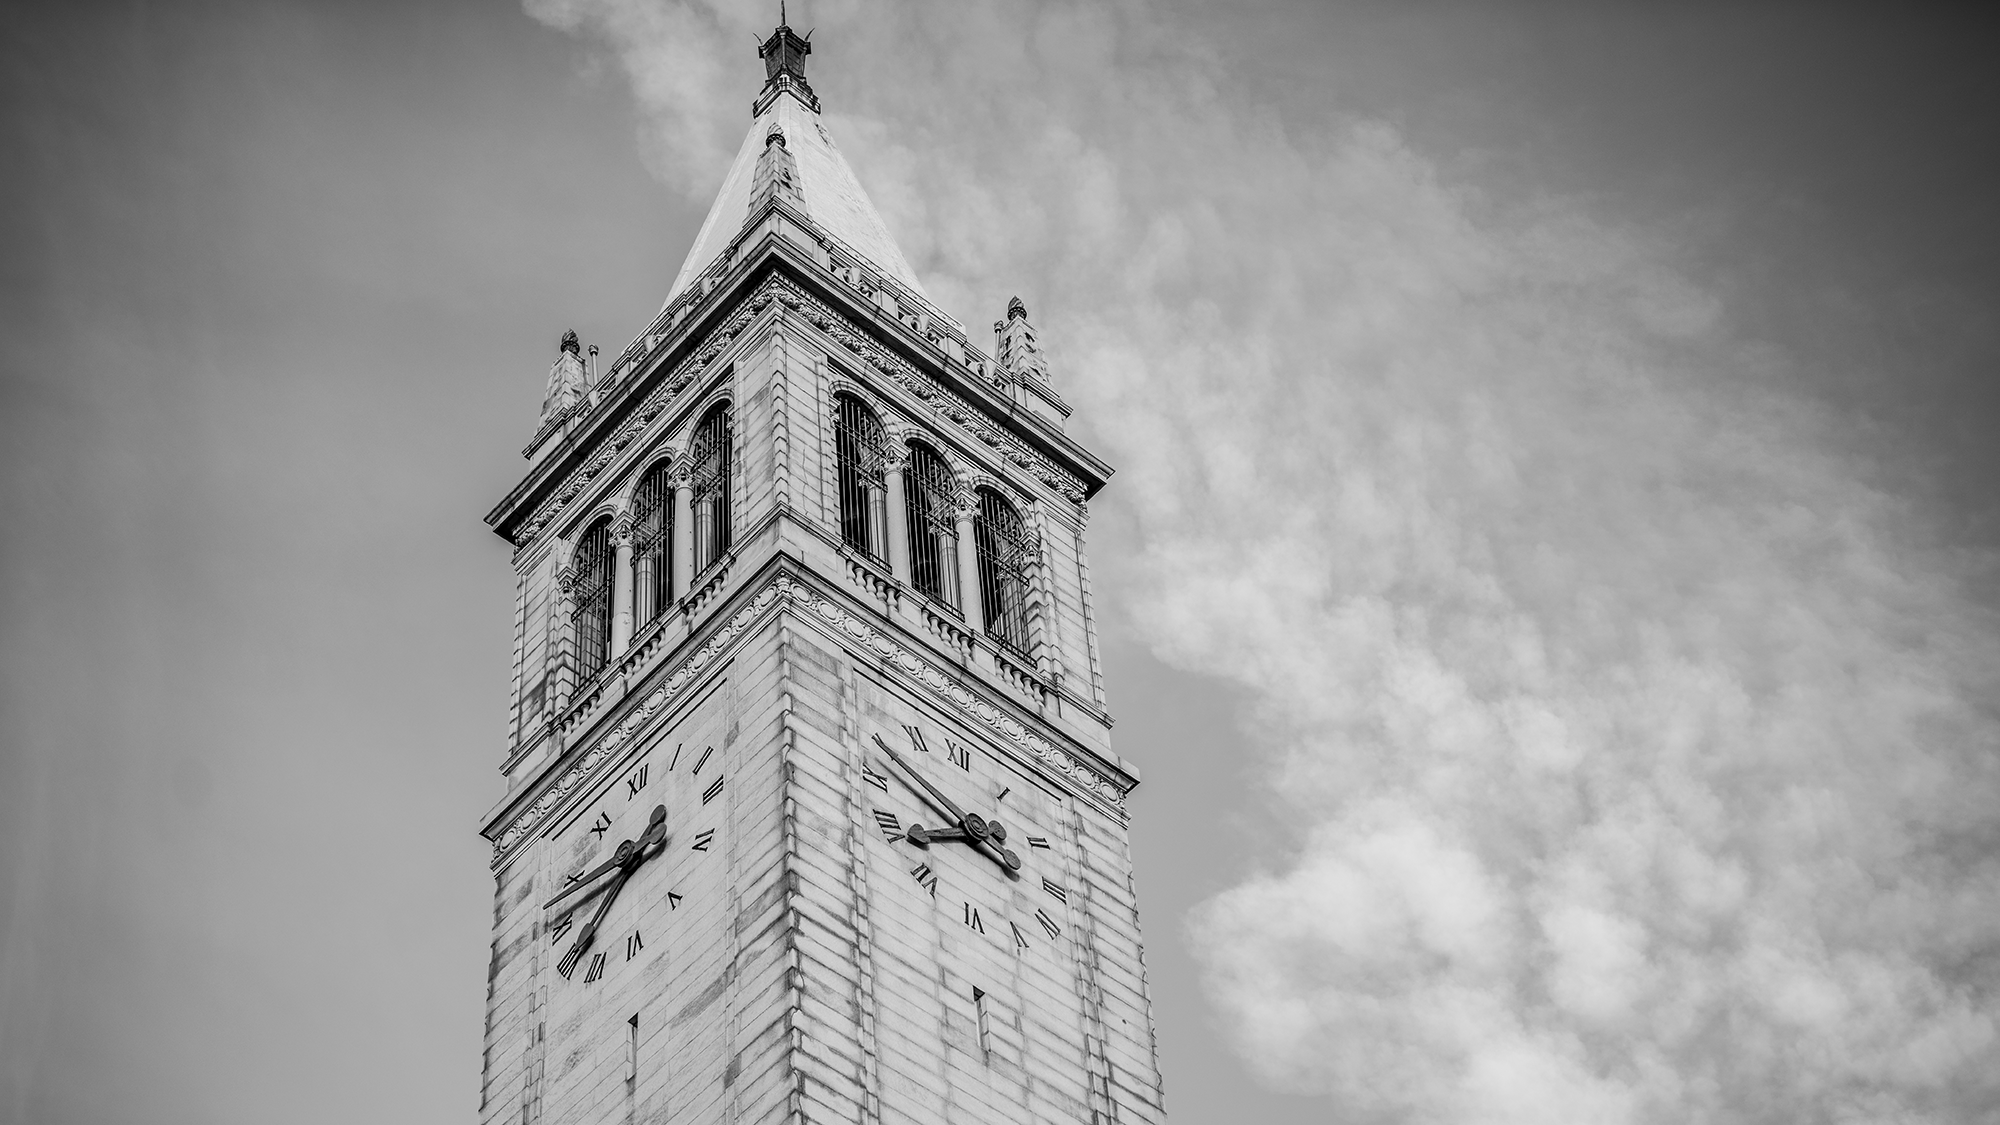 A black and white photo of the top of the UC Berkeley campanile, taken from the ground.